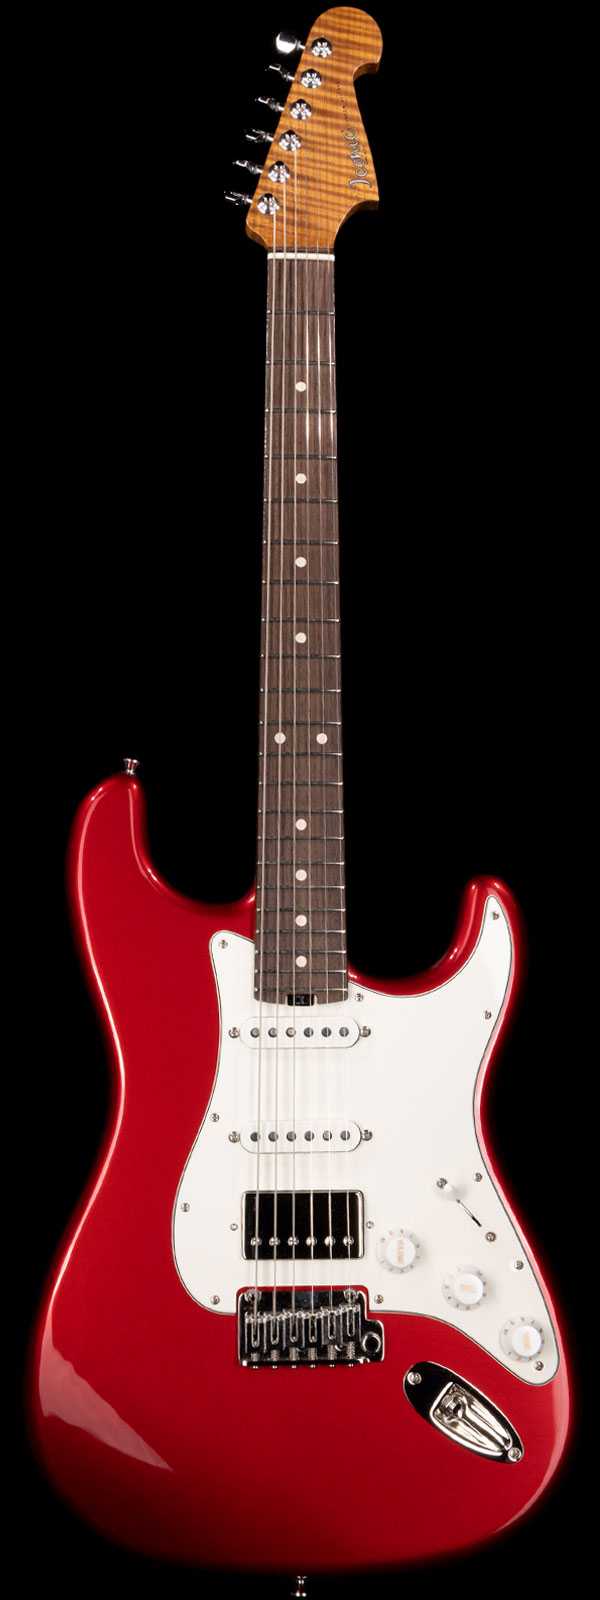 Iconic Vintage Modern S Roasted 5A Flame Maple Neck Candy Apple Red